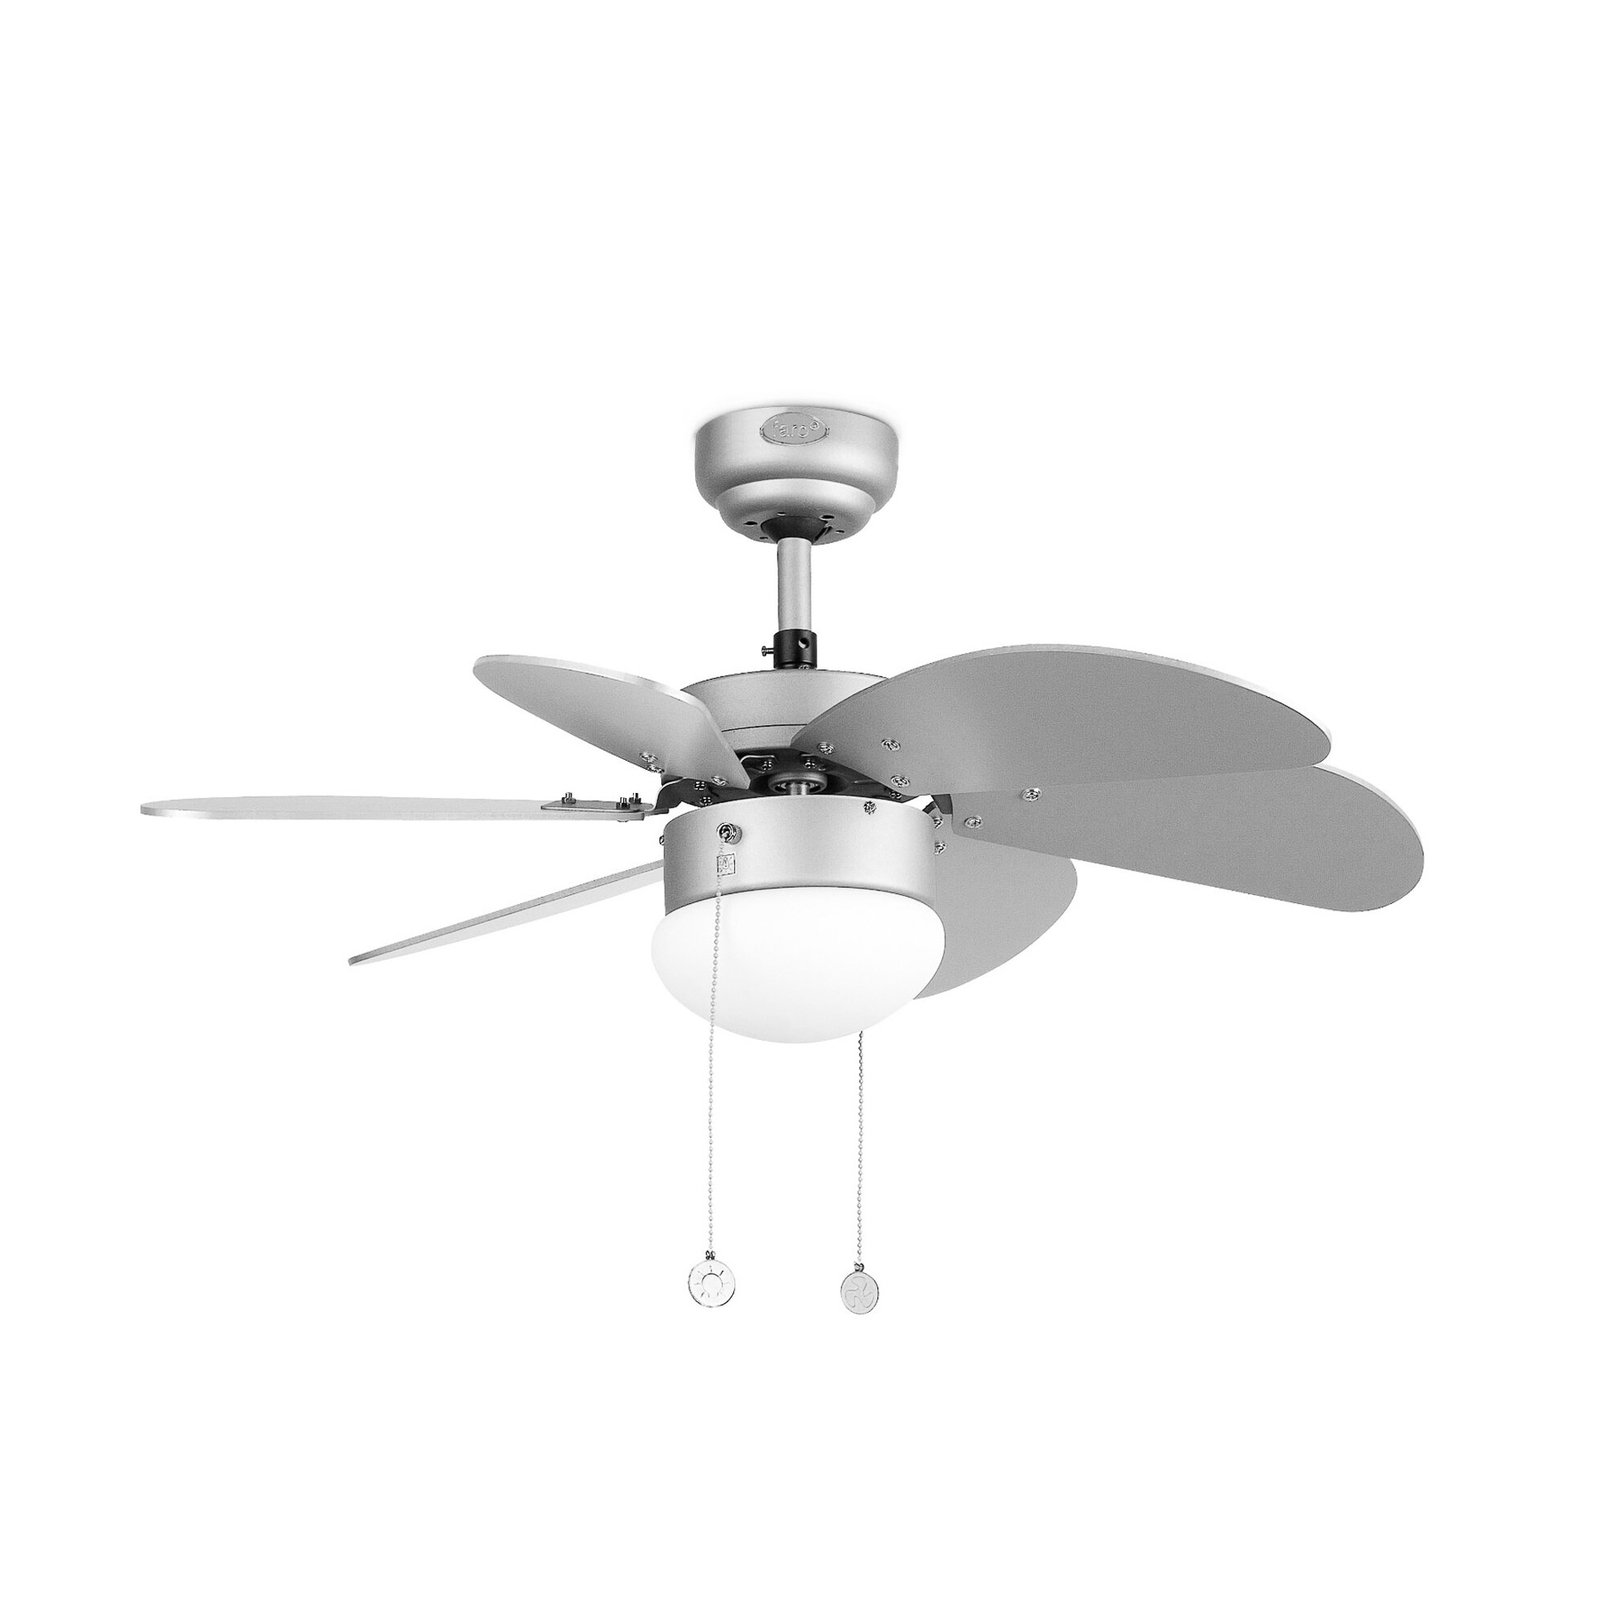 Palao ceiling fan with a light, grey